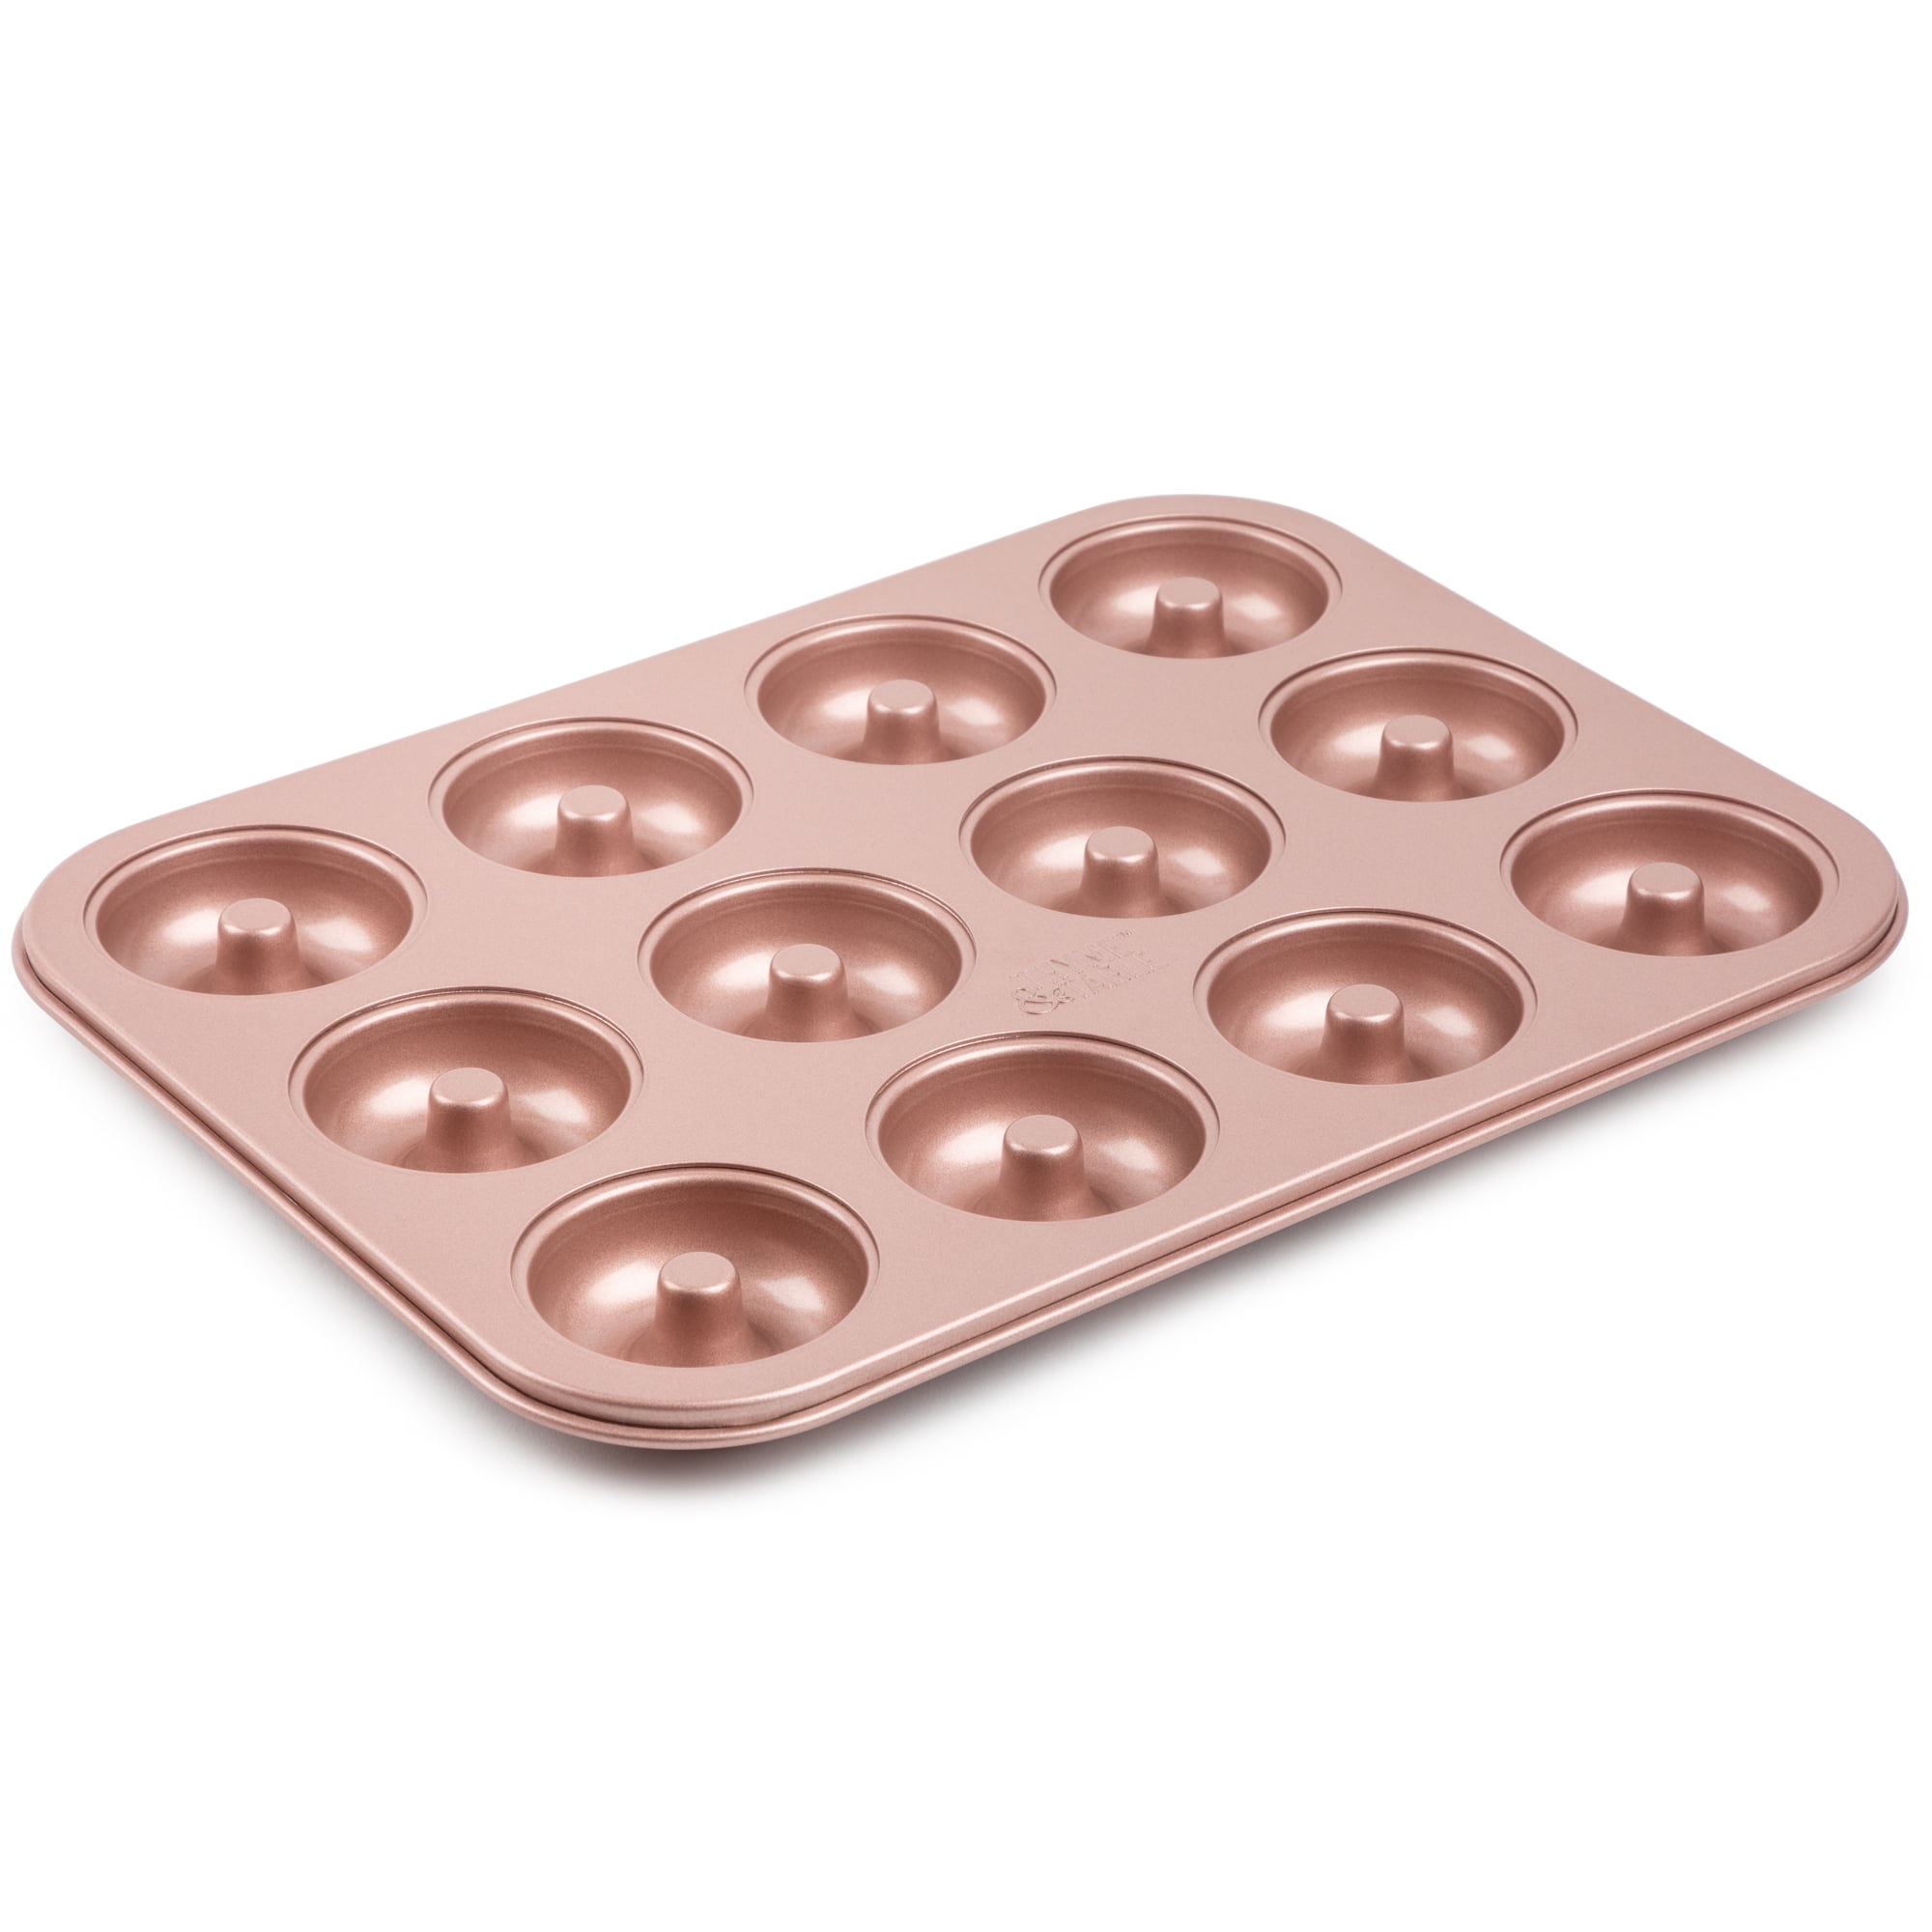 Pink 48 Hole Non Stick Silicone Mini Donut Pan Mould Tray Cooking Mold Baking 